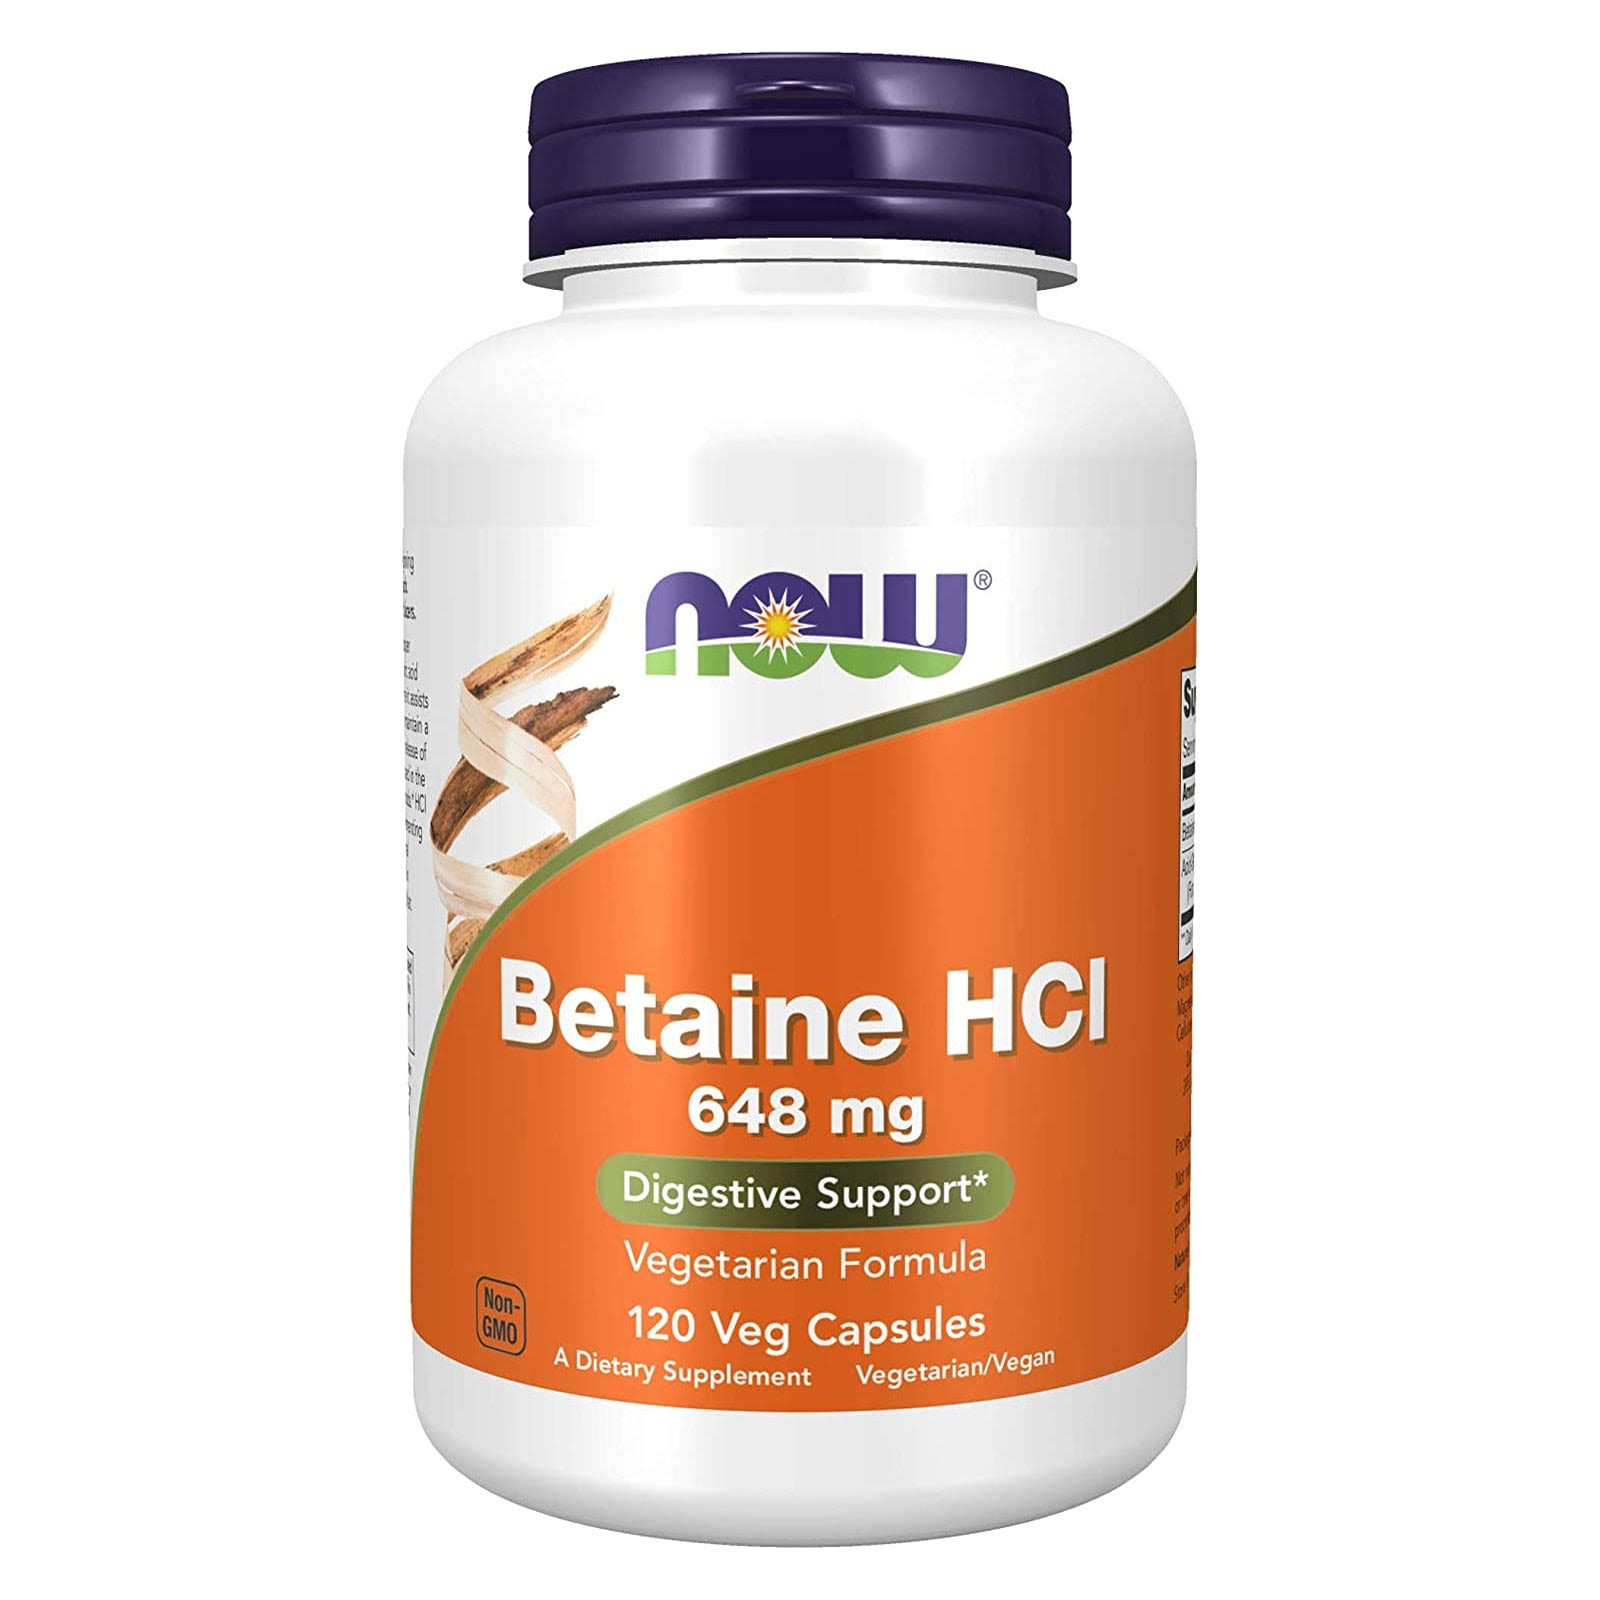 Now Foods Betaine HCl Digestive Enzyme - 120 Capsules